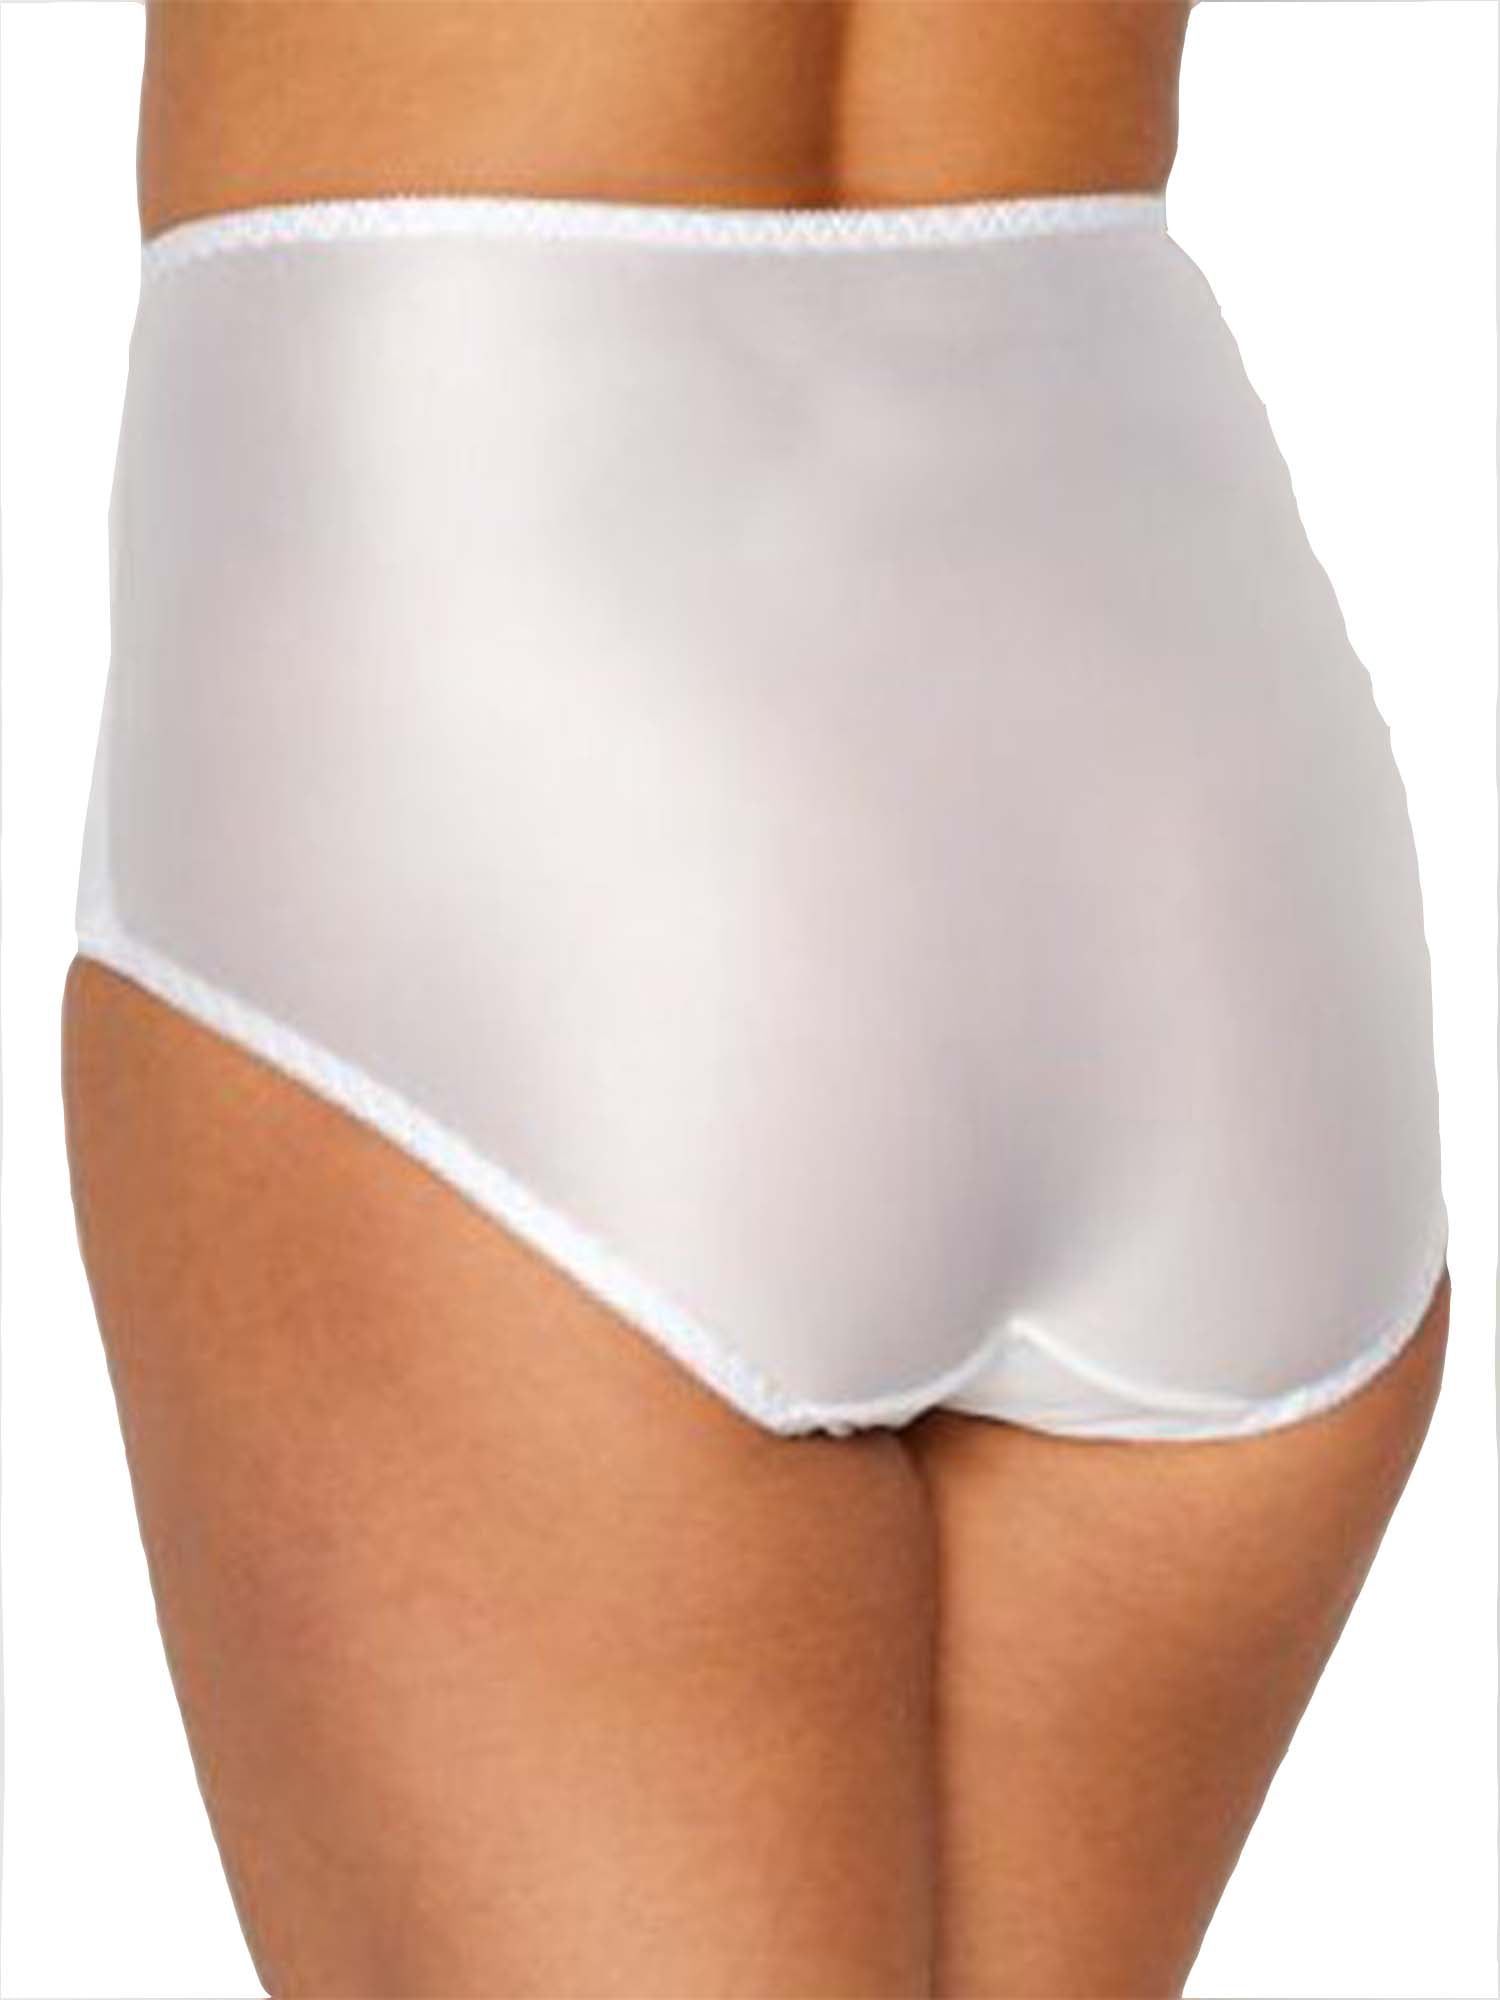 Bali White Lace Double Support Briefs Women's Size Large NEW - beyond  exchange